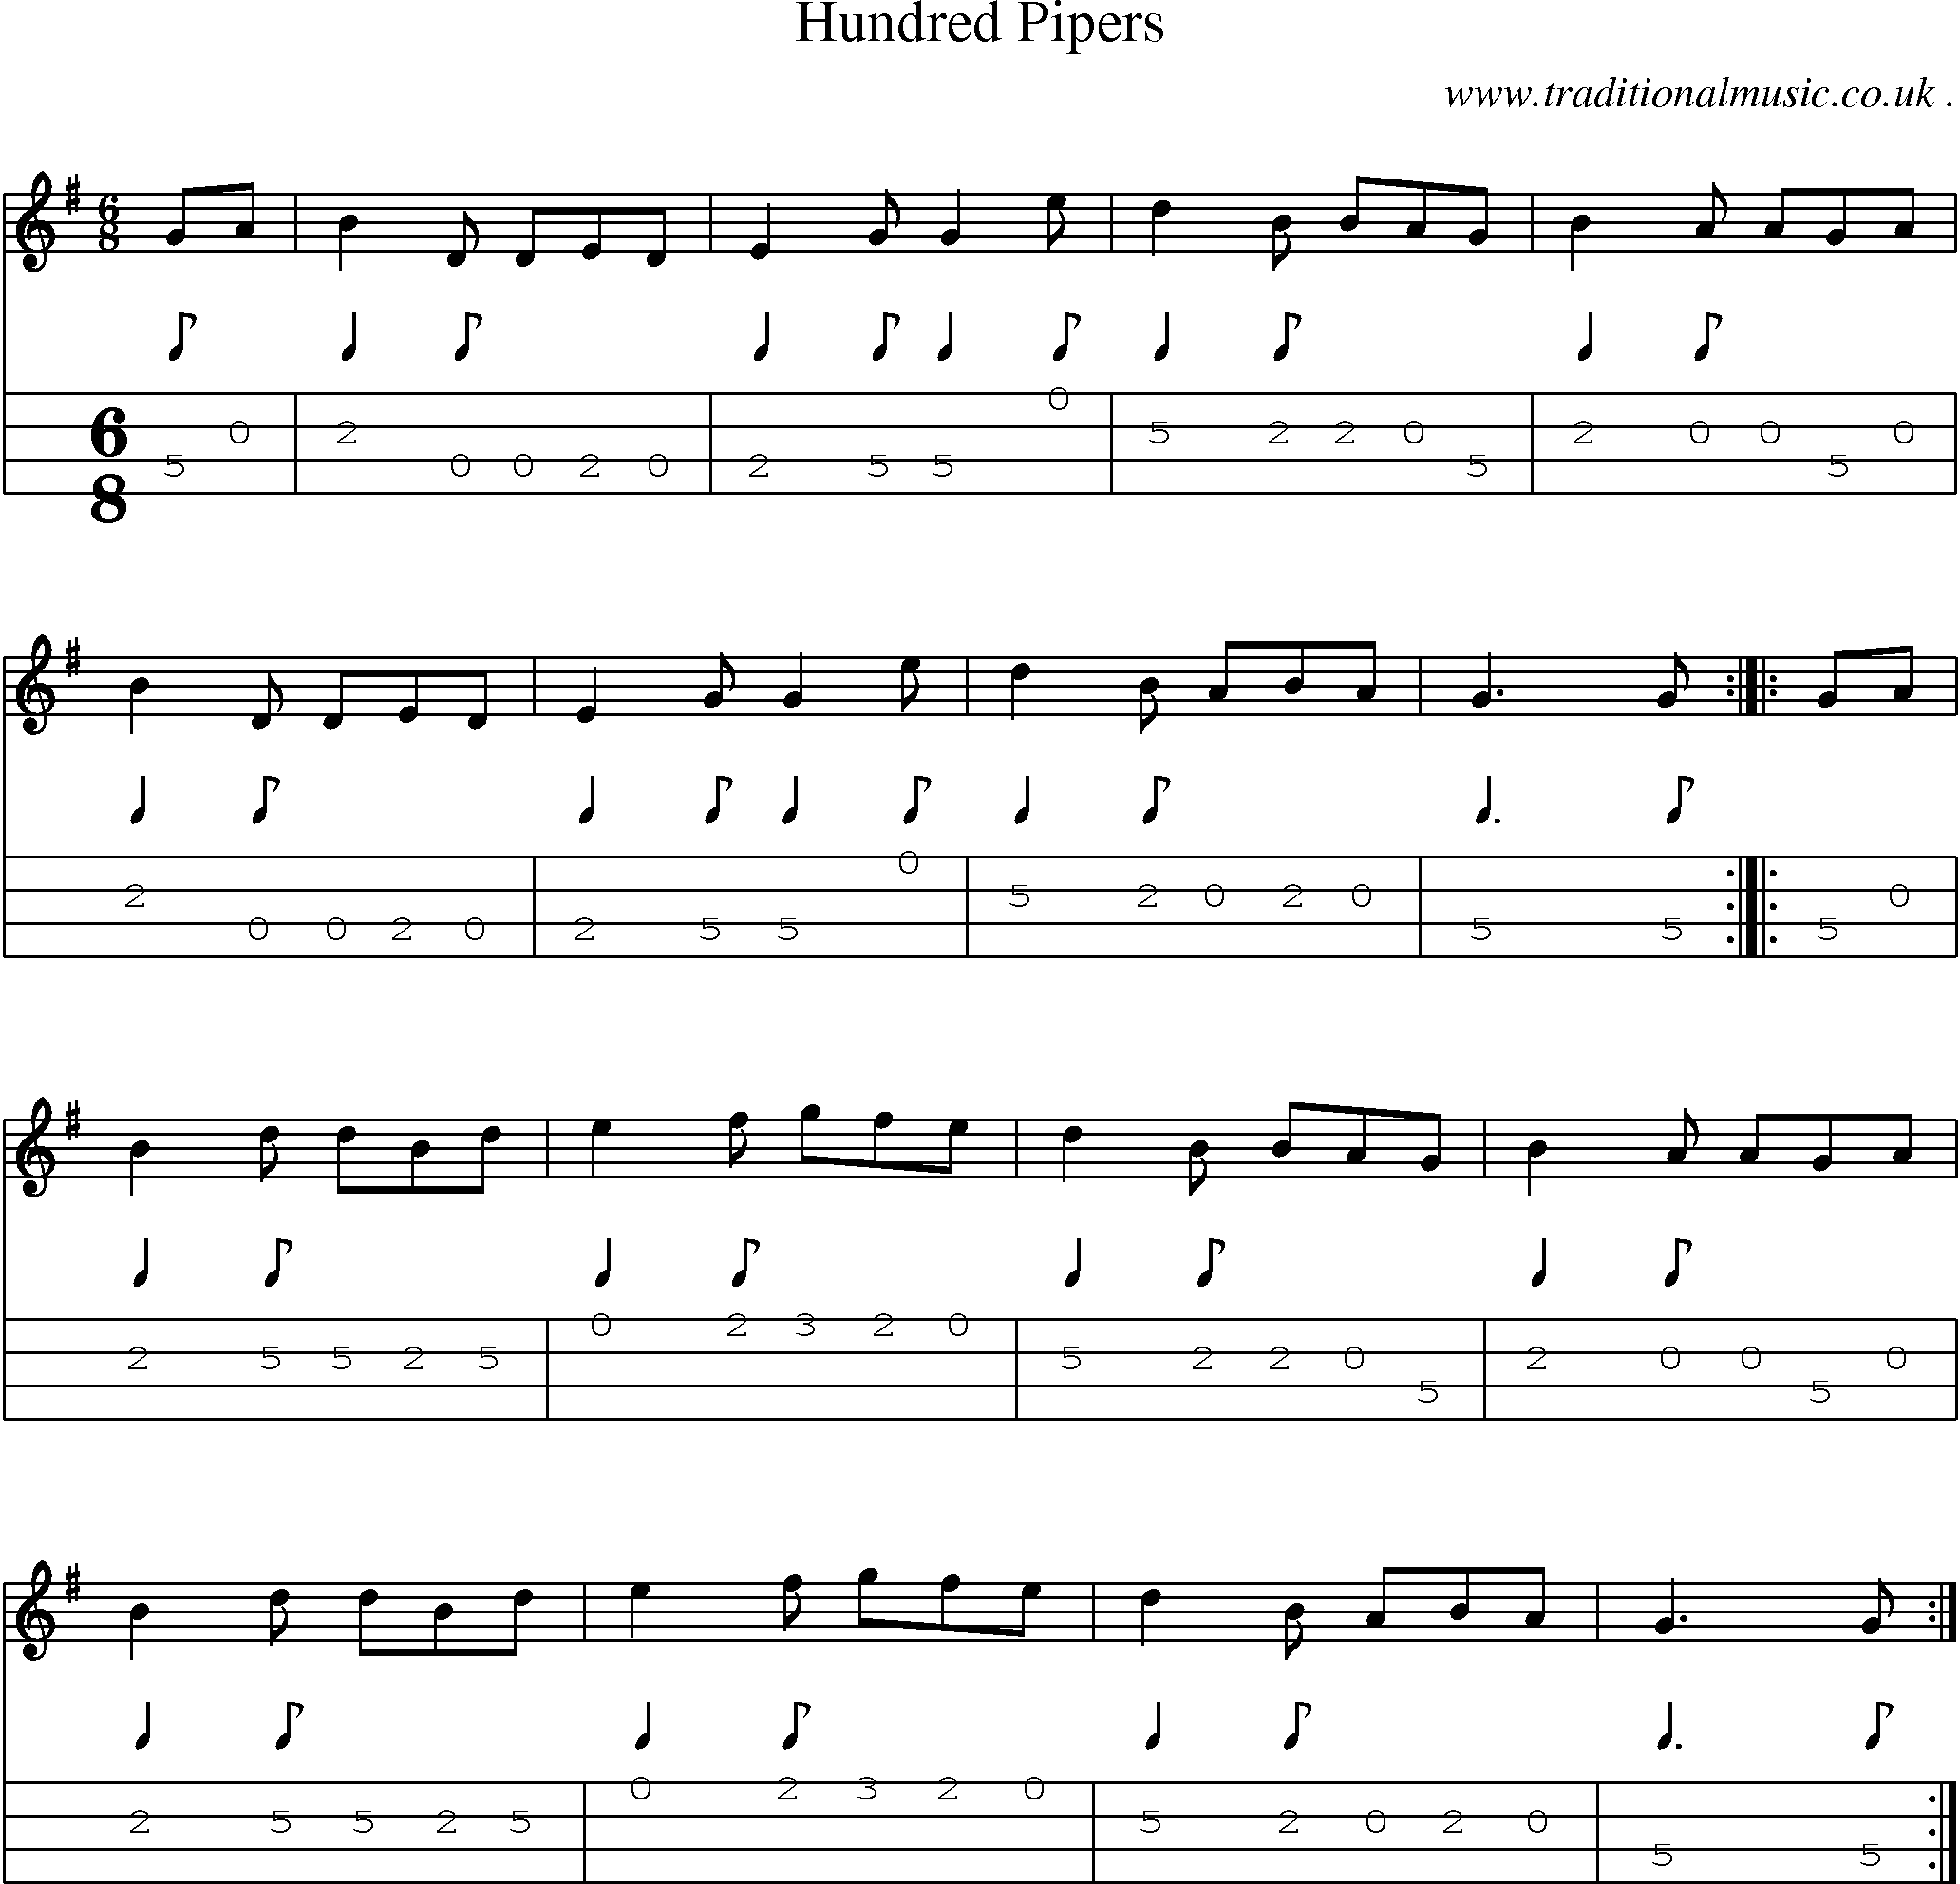 Sheet-Music and Mandolin Tabs for Hundred Pipers